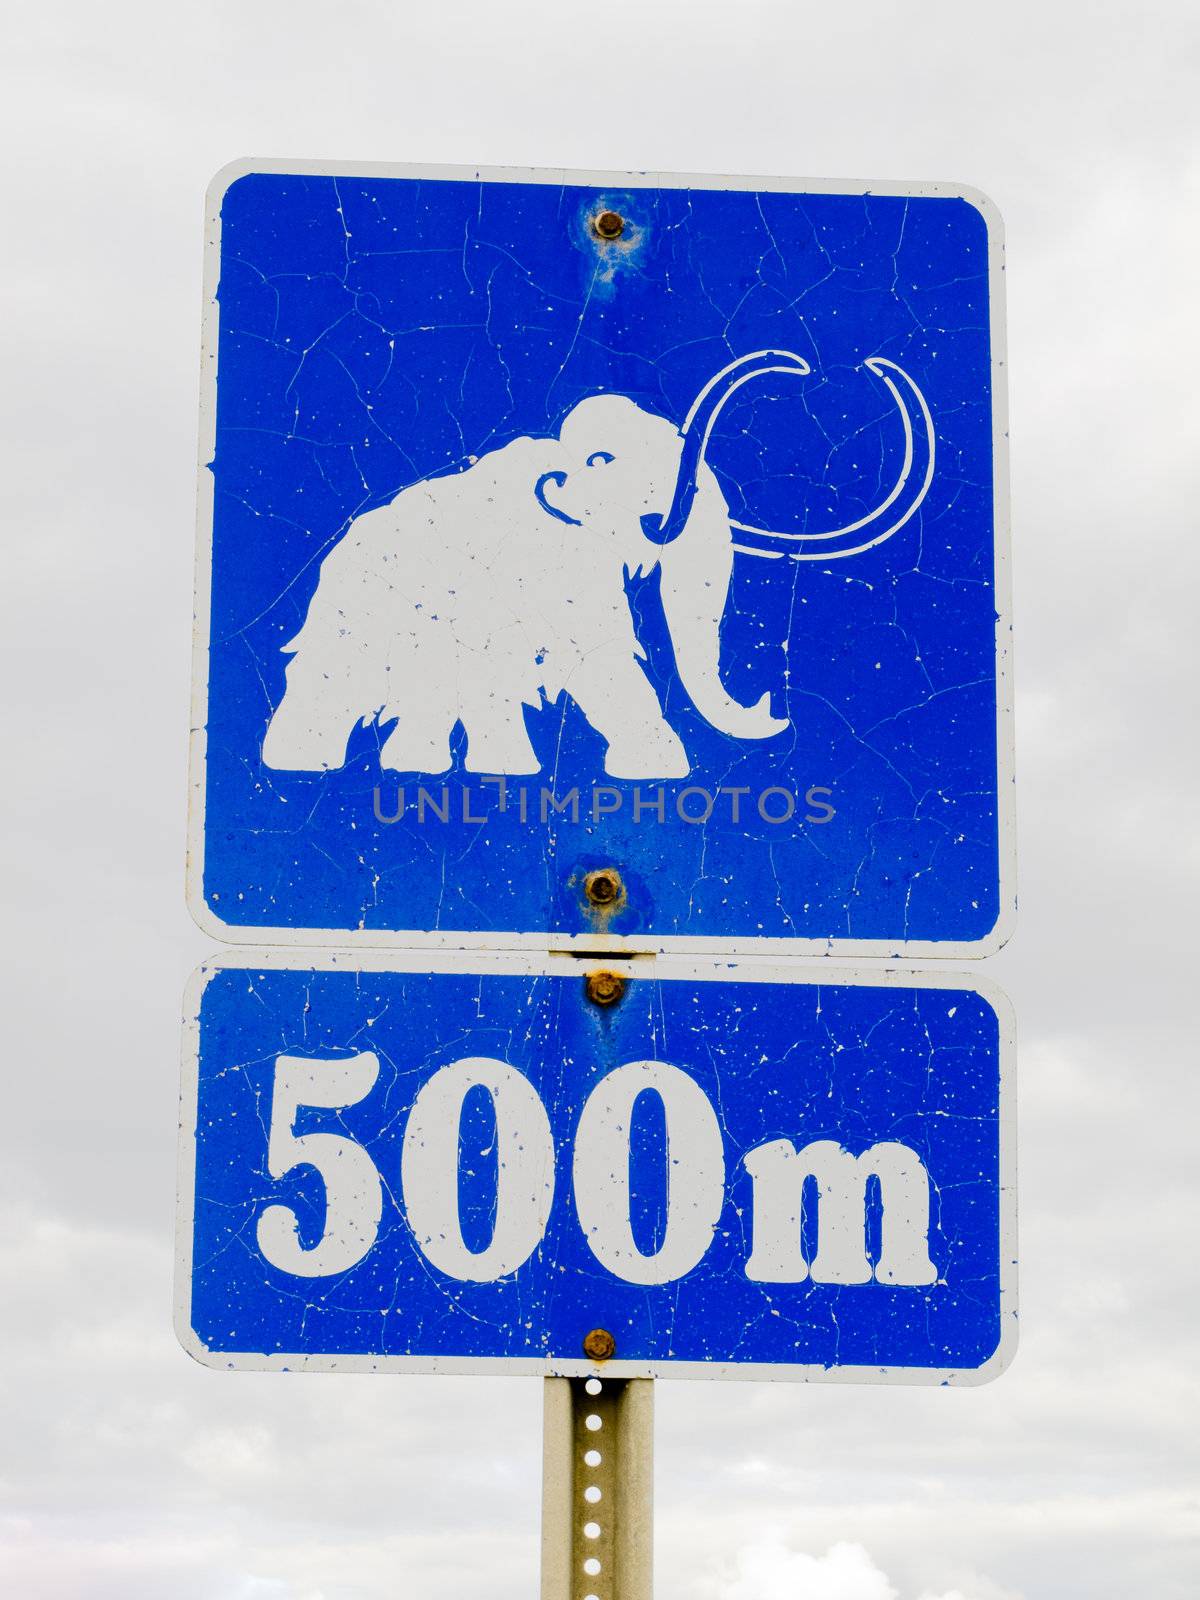 Funny mammoth symbol on road sign by PiLens